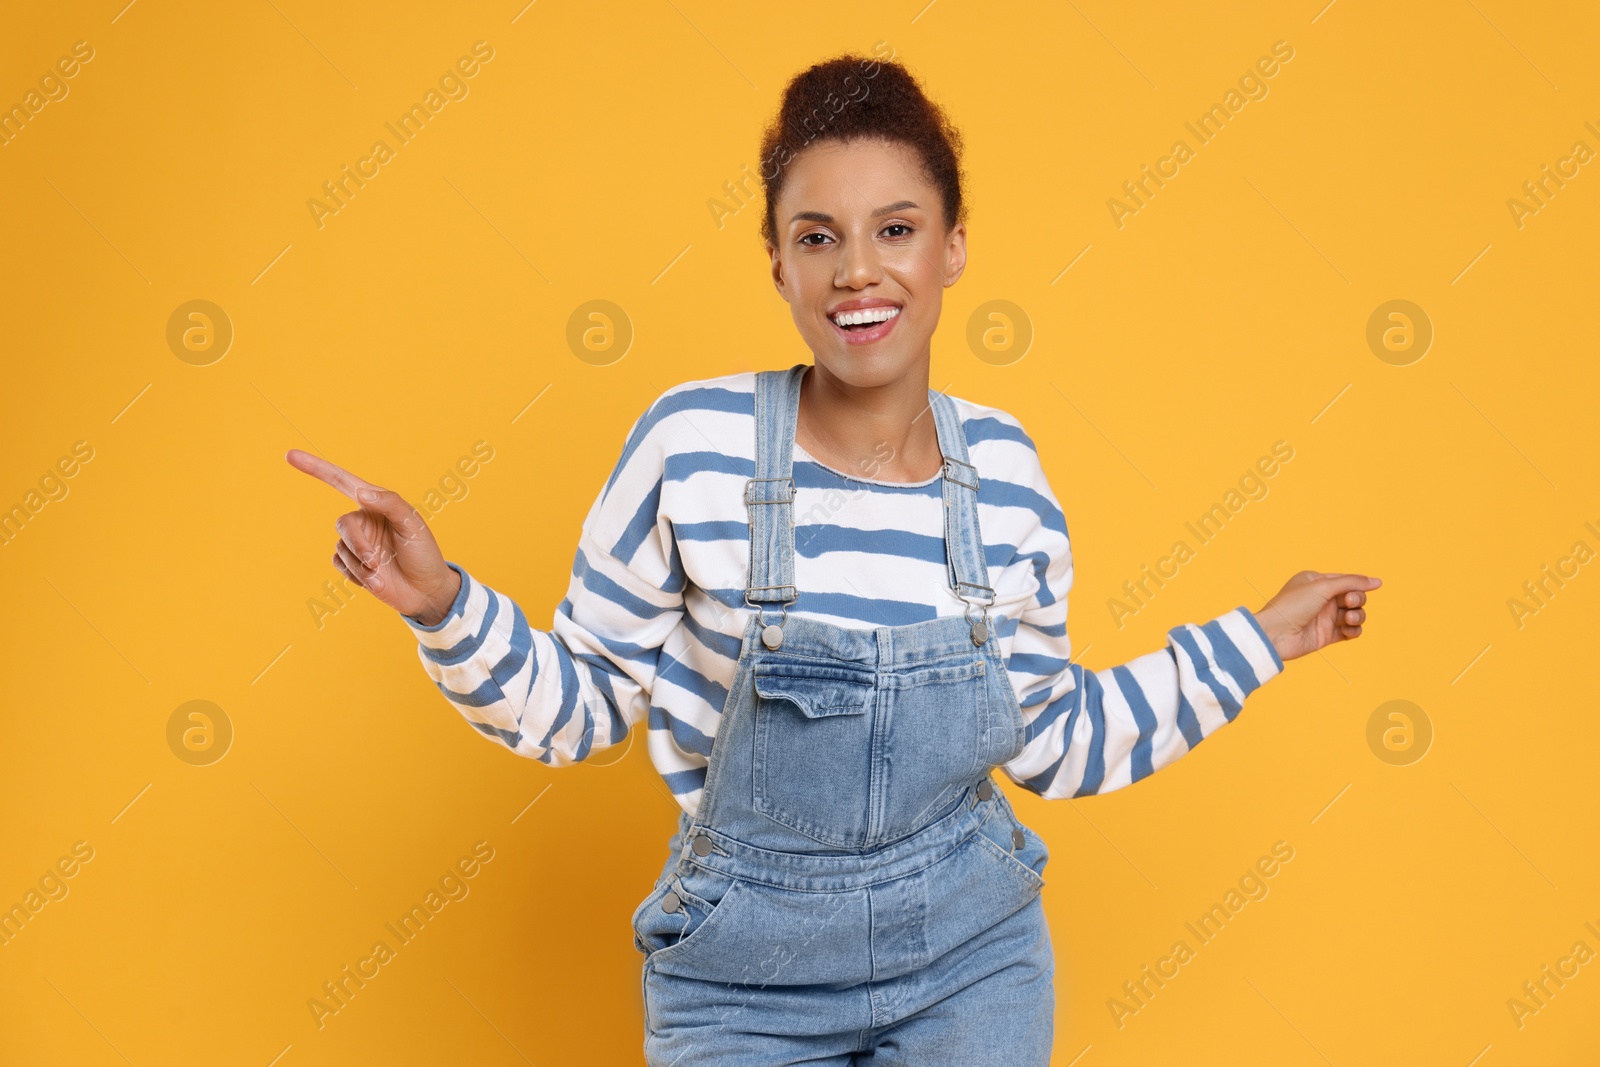 Photo of Happy young woman dancing on orange background